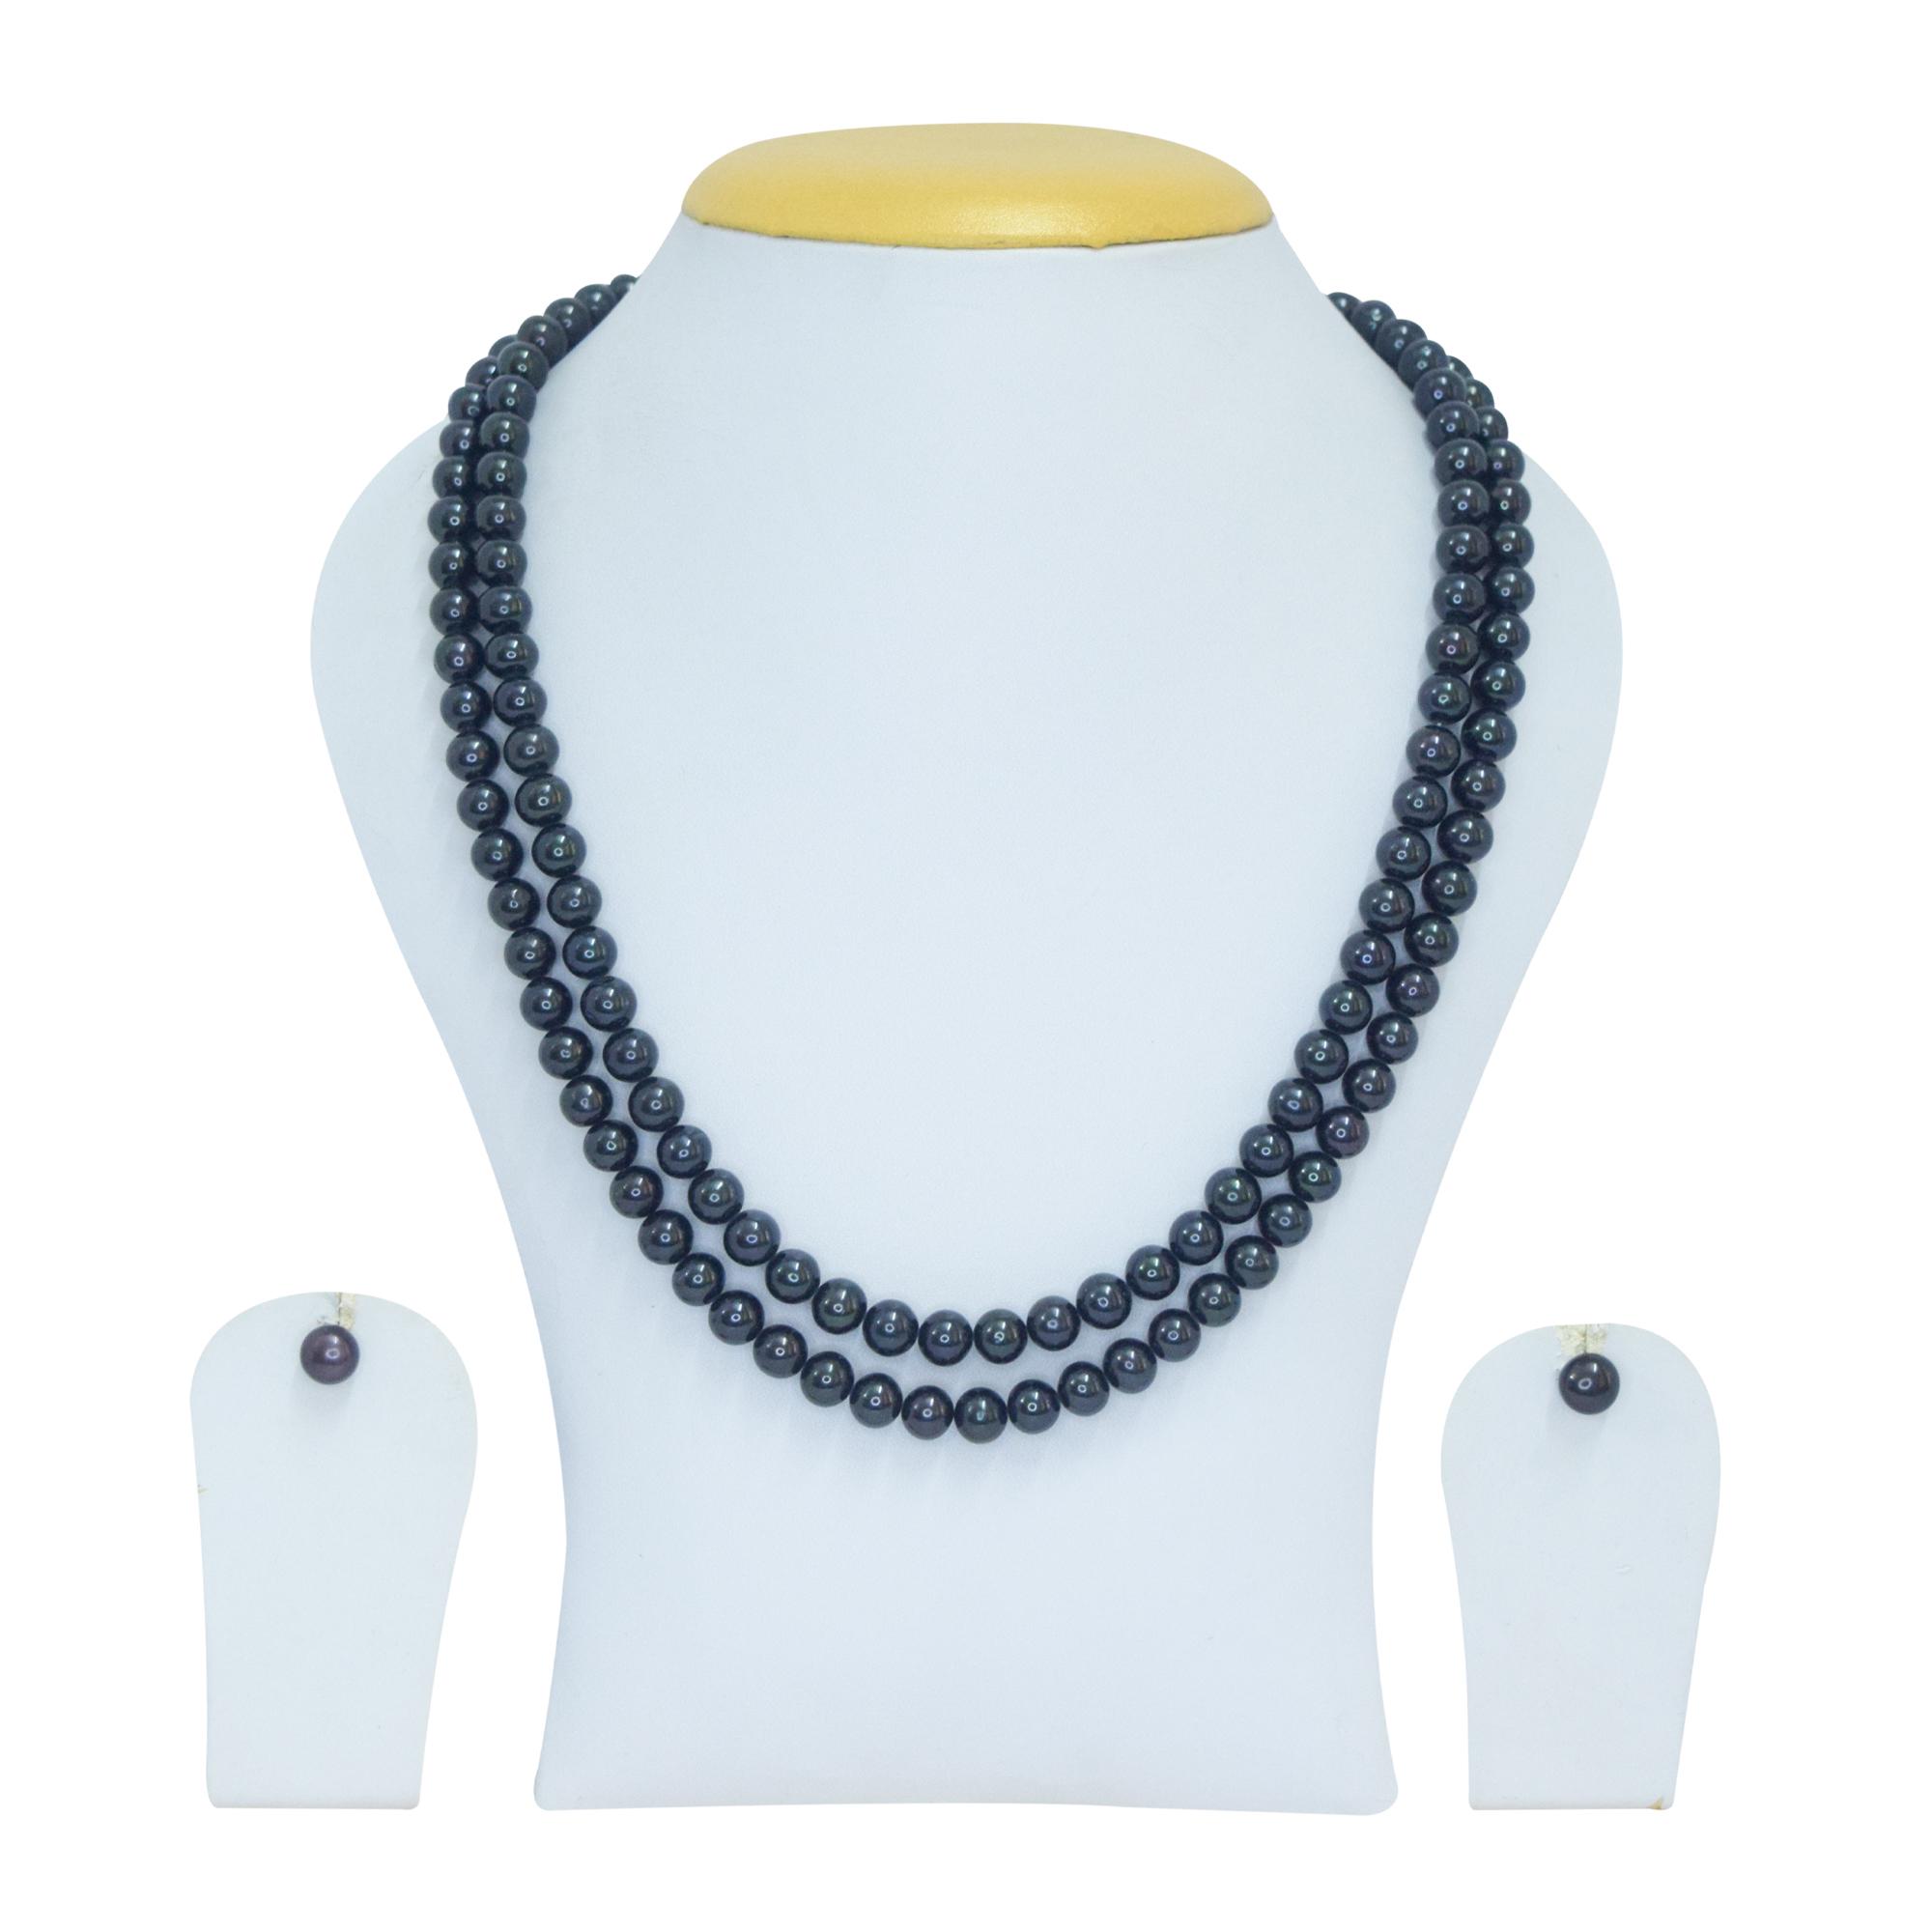 Buy The Best Online at Best Price in India | jpearls.com